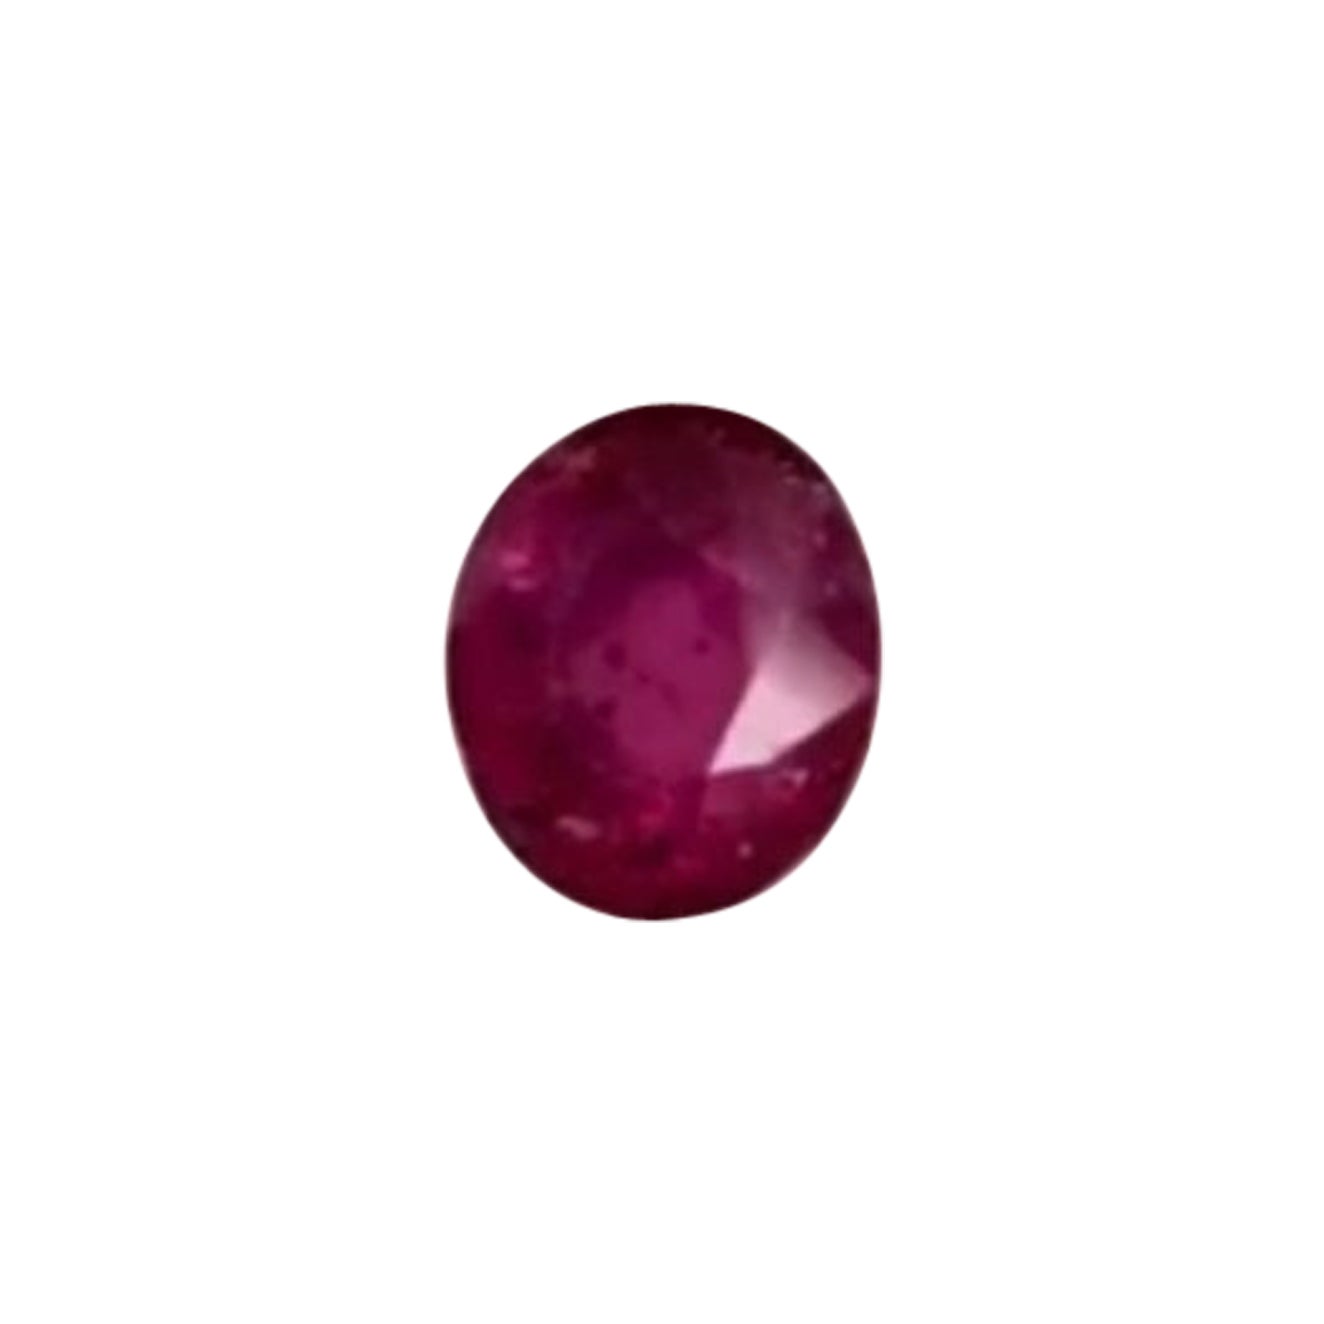  GFCO Certified 3.63 Carats Untreated Ruby  For Sale